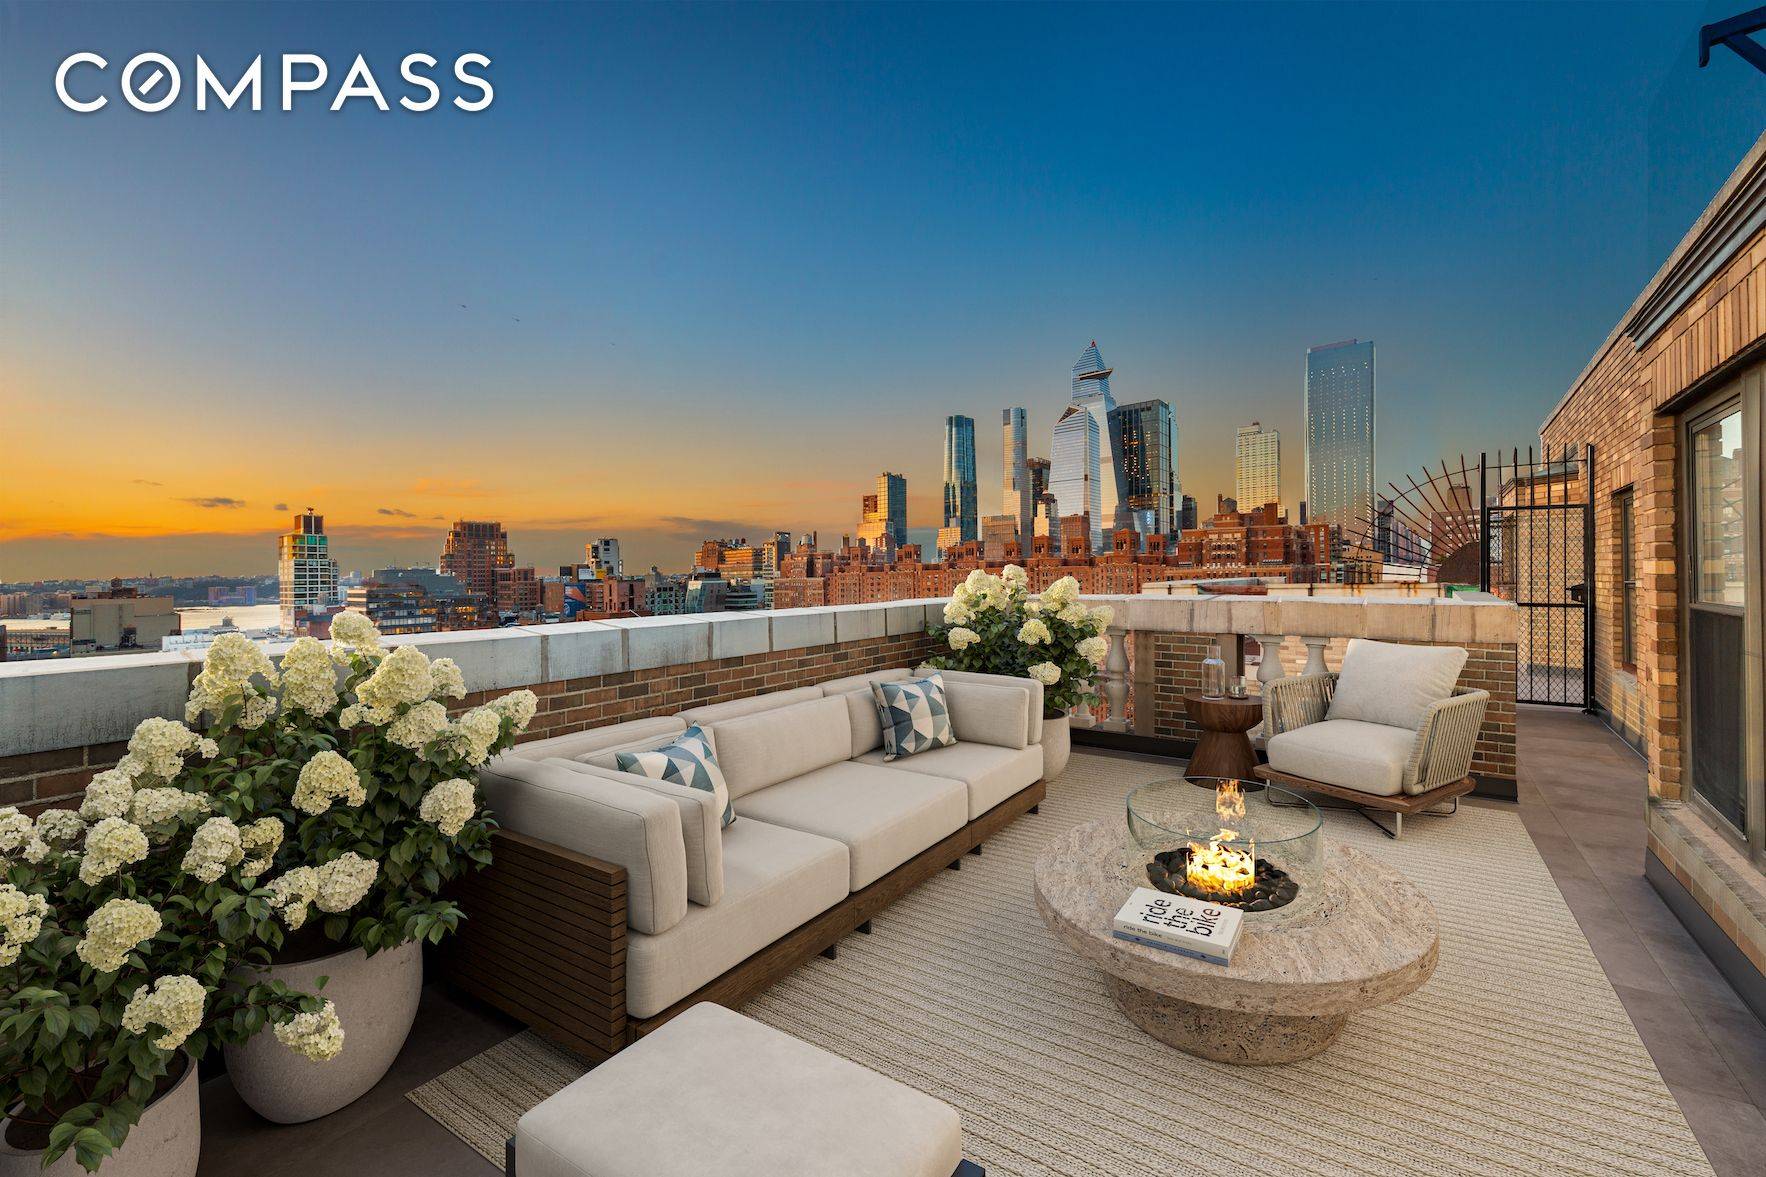 Your own private terrace with unobstructed views over West Chelsea and the Hudson river with the towers of Hudson Yards and midtown Manhattan in the near distance.